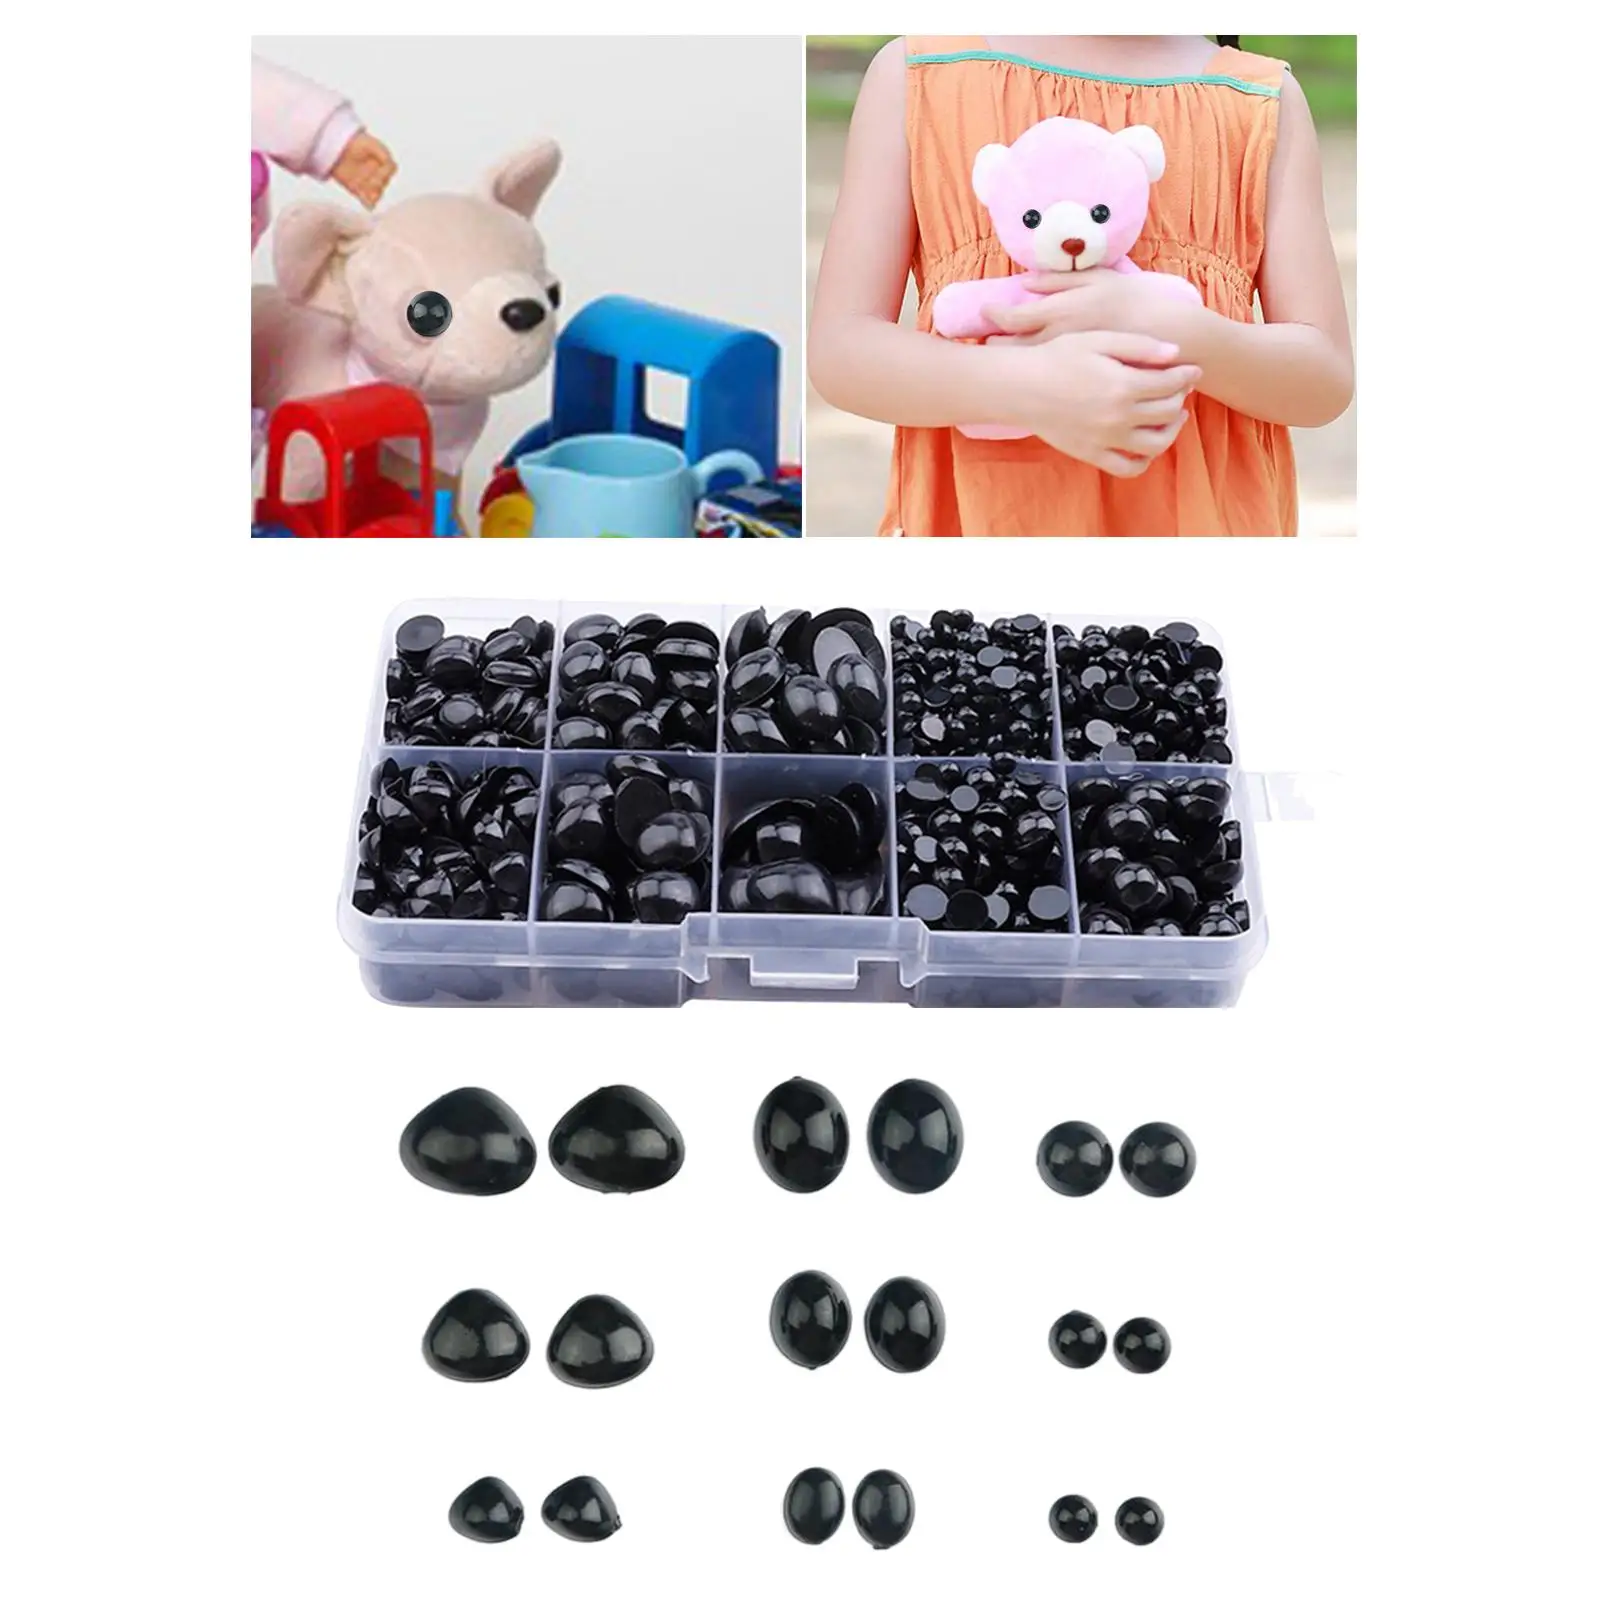 1000Pcs Black Plastic Safety Eyes and Noses DIY Crafts Half Round Cabochons Flat Bottomed Eyes Craft Doll Eyes for Bear Puppet